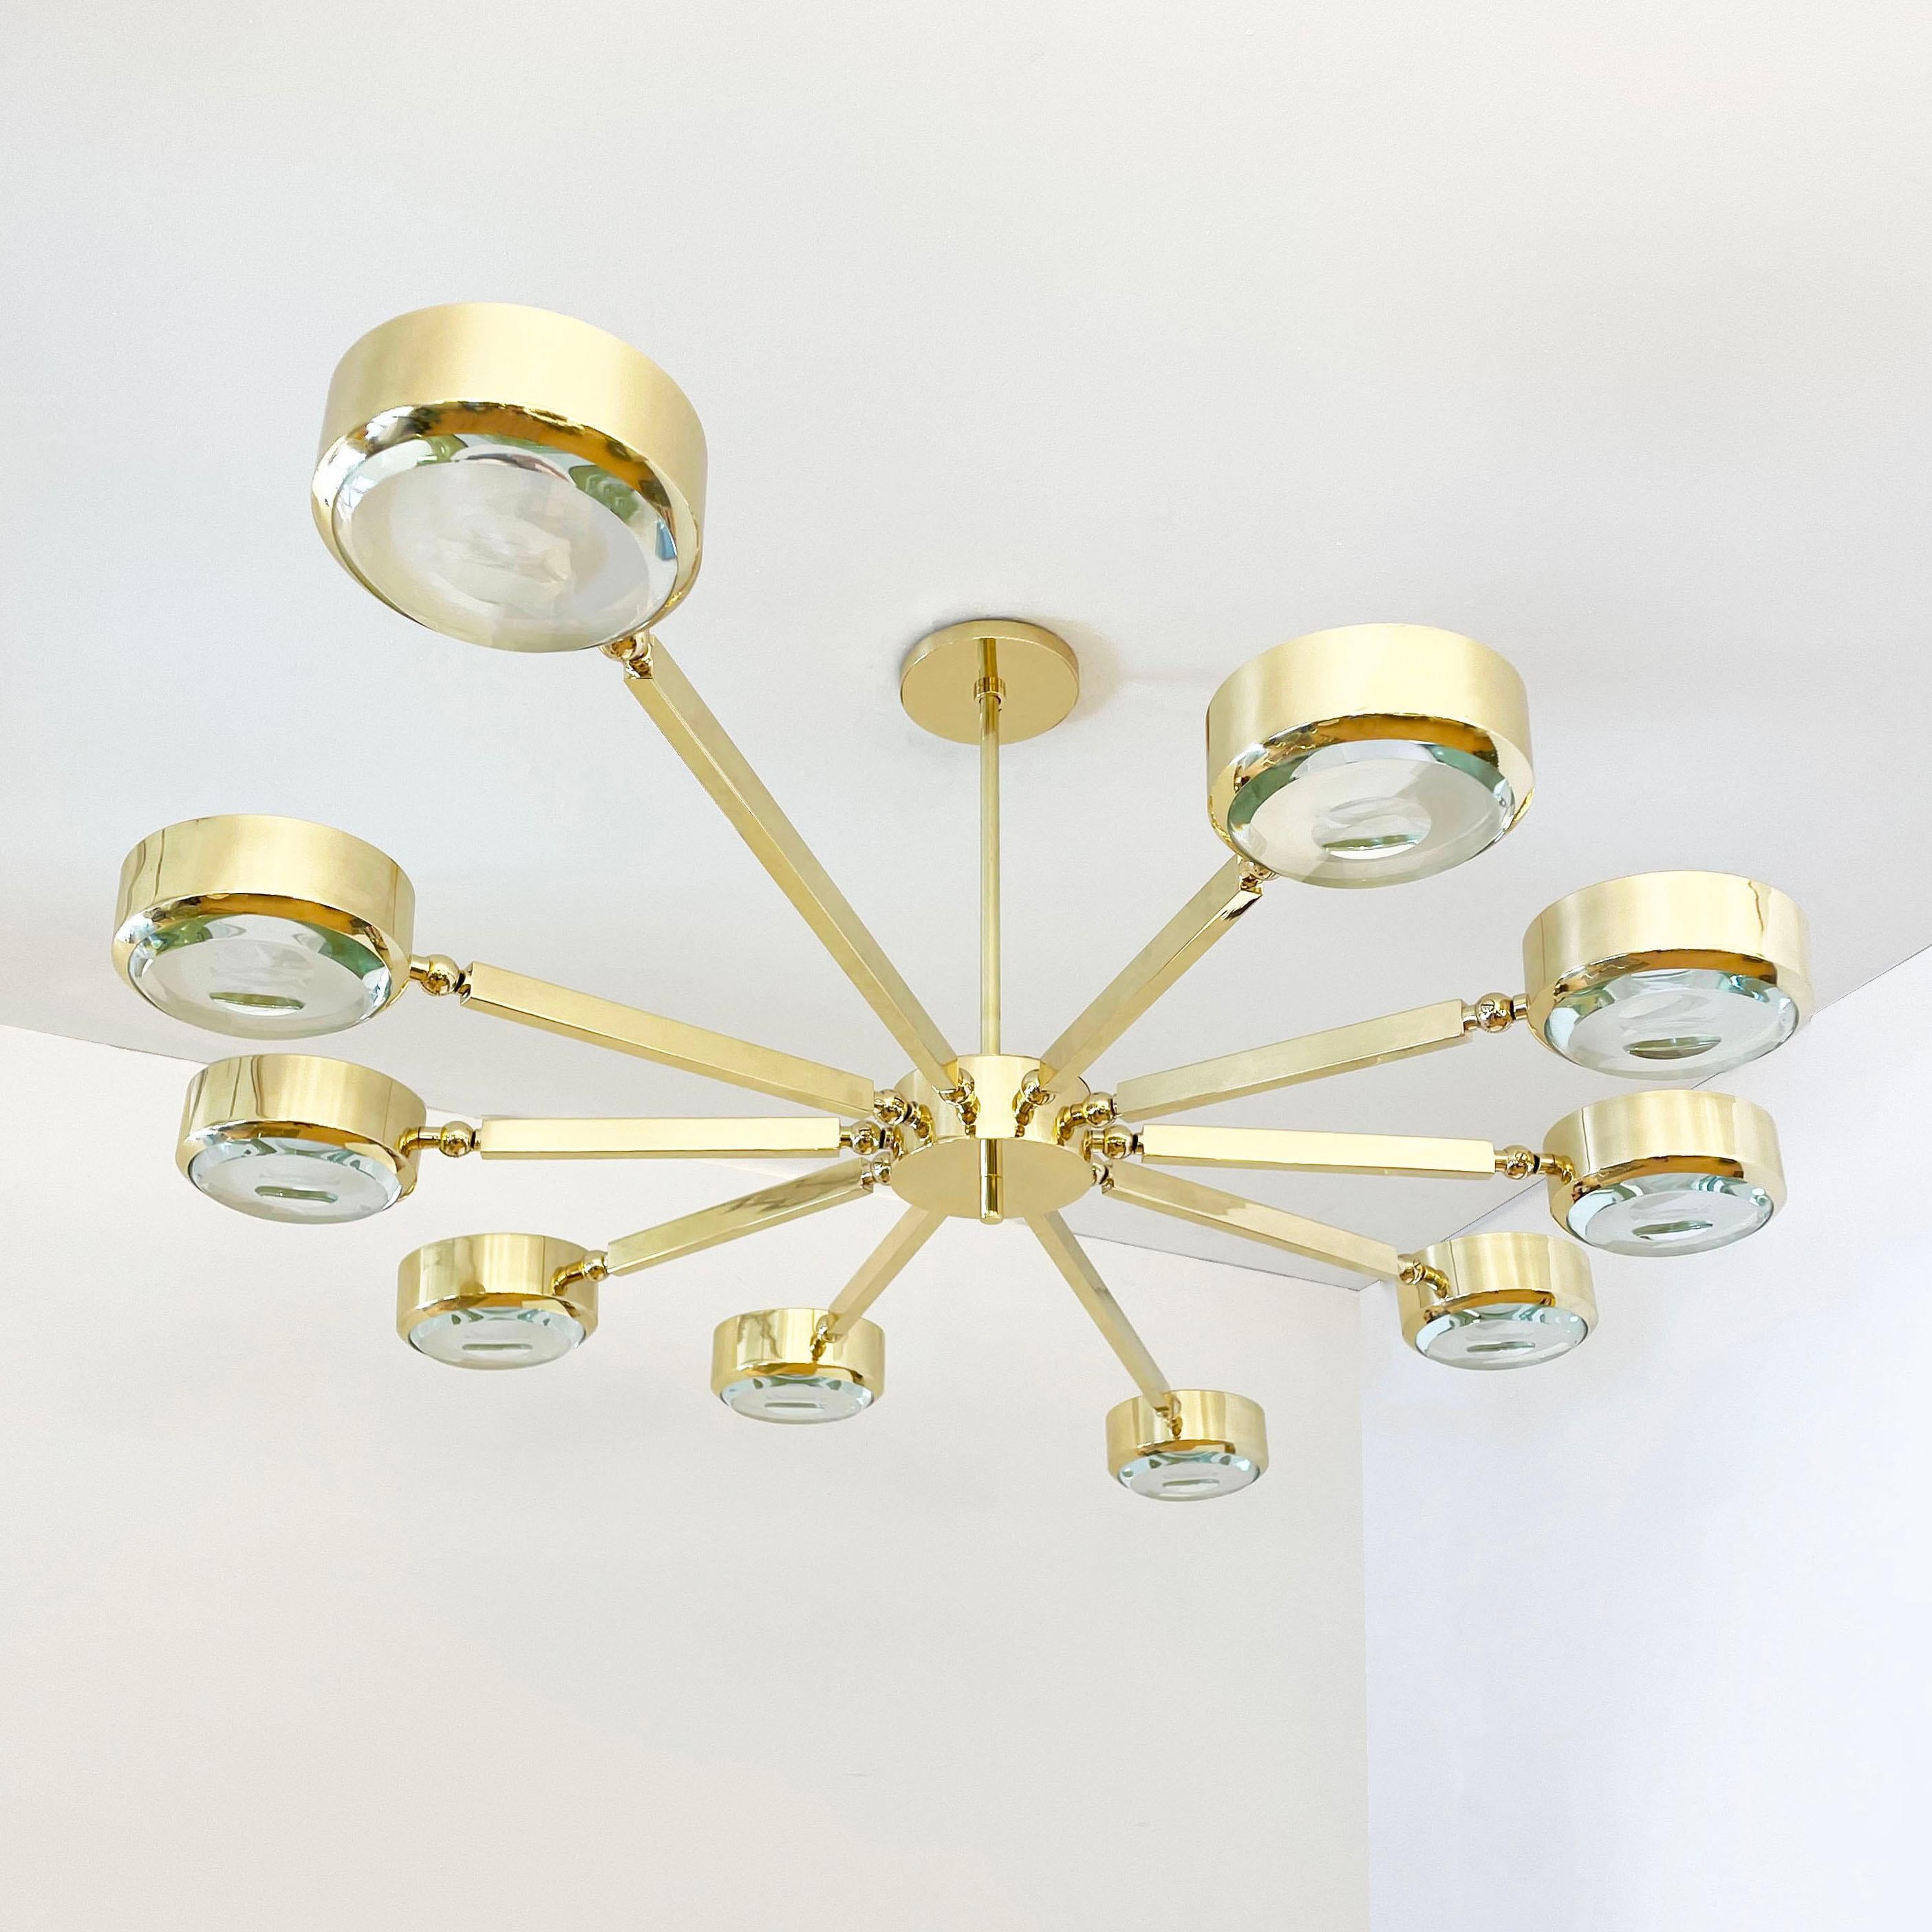 Contemporary Oculus Oval Ceiling Light by Gaspare Asaro- Polished Nickel with Carved Glass For Sale